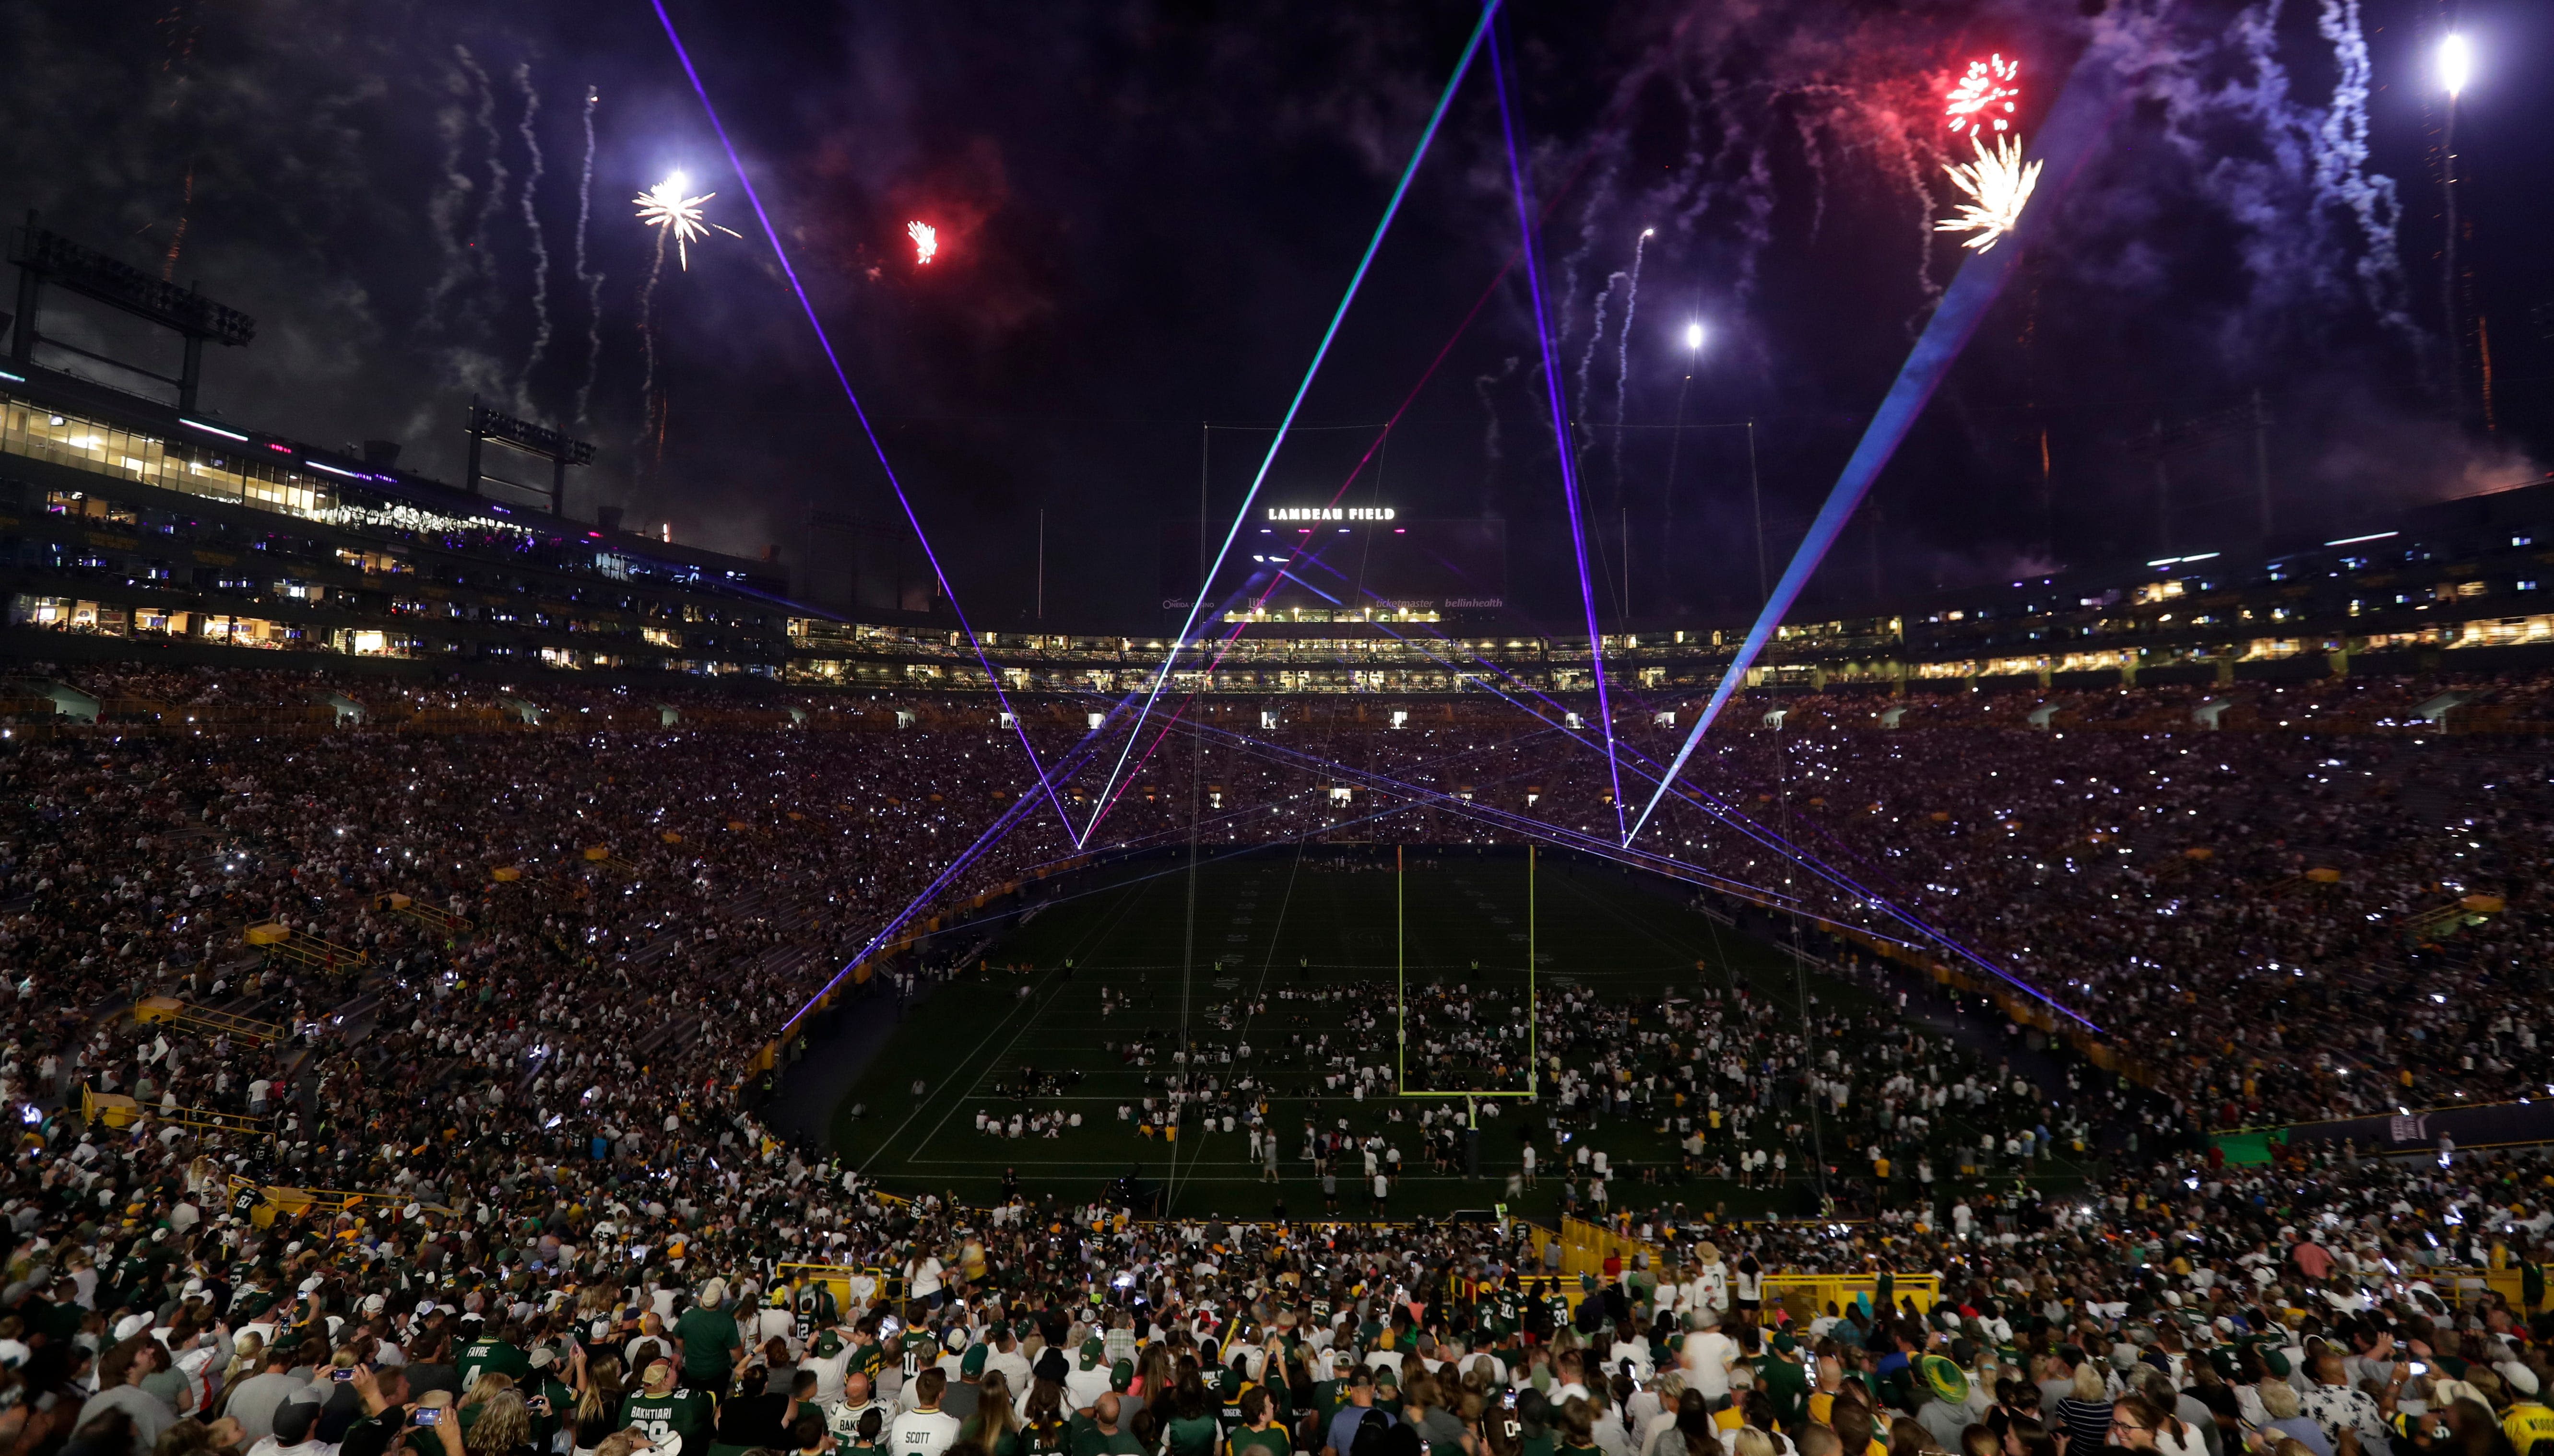 For fans heading to Green Bay Packers Family Night, here is what you need to do